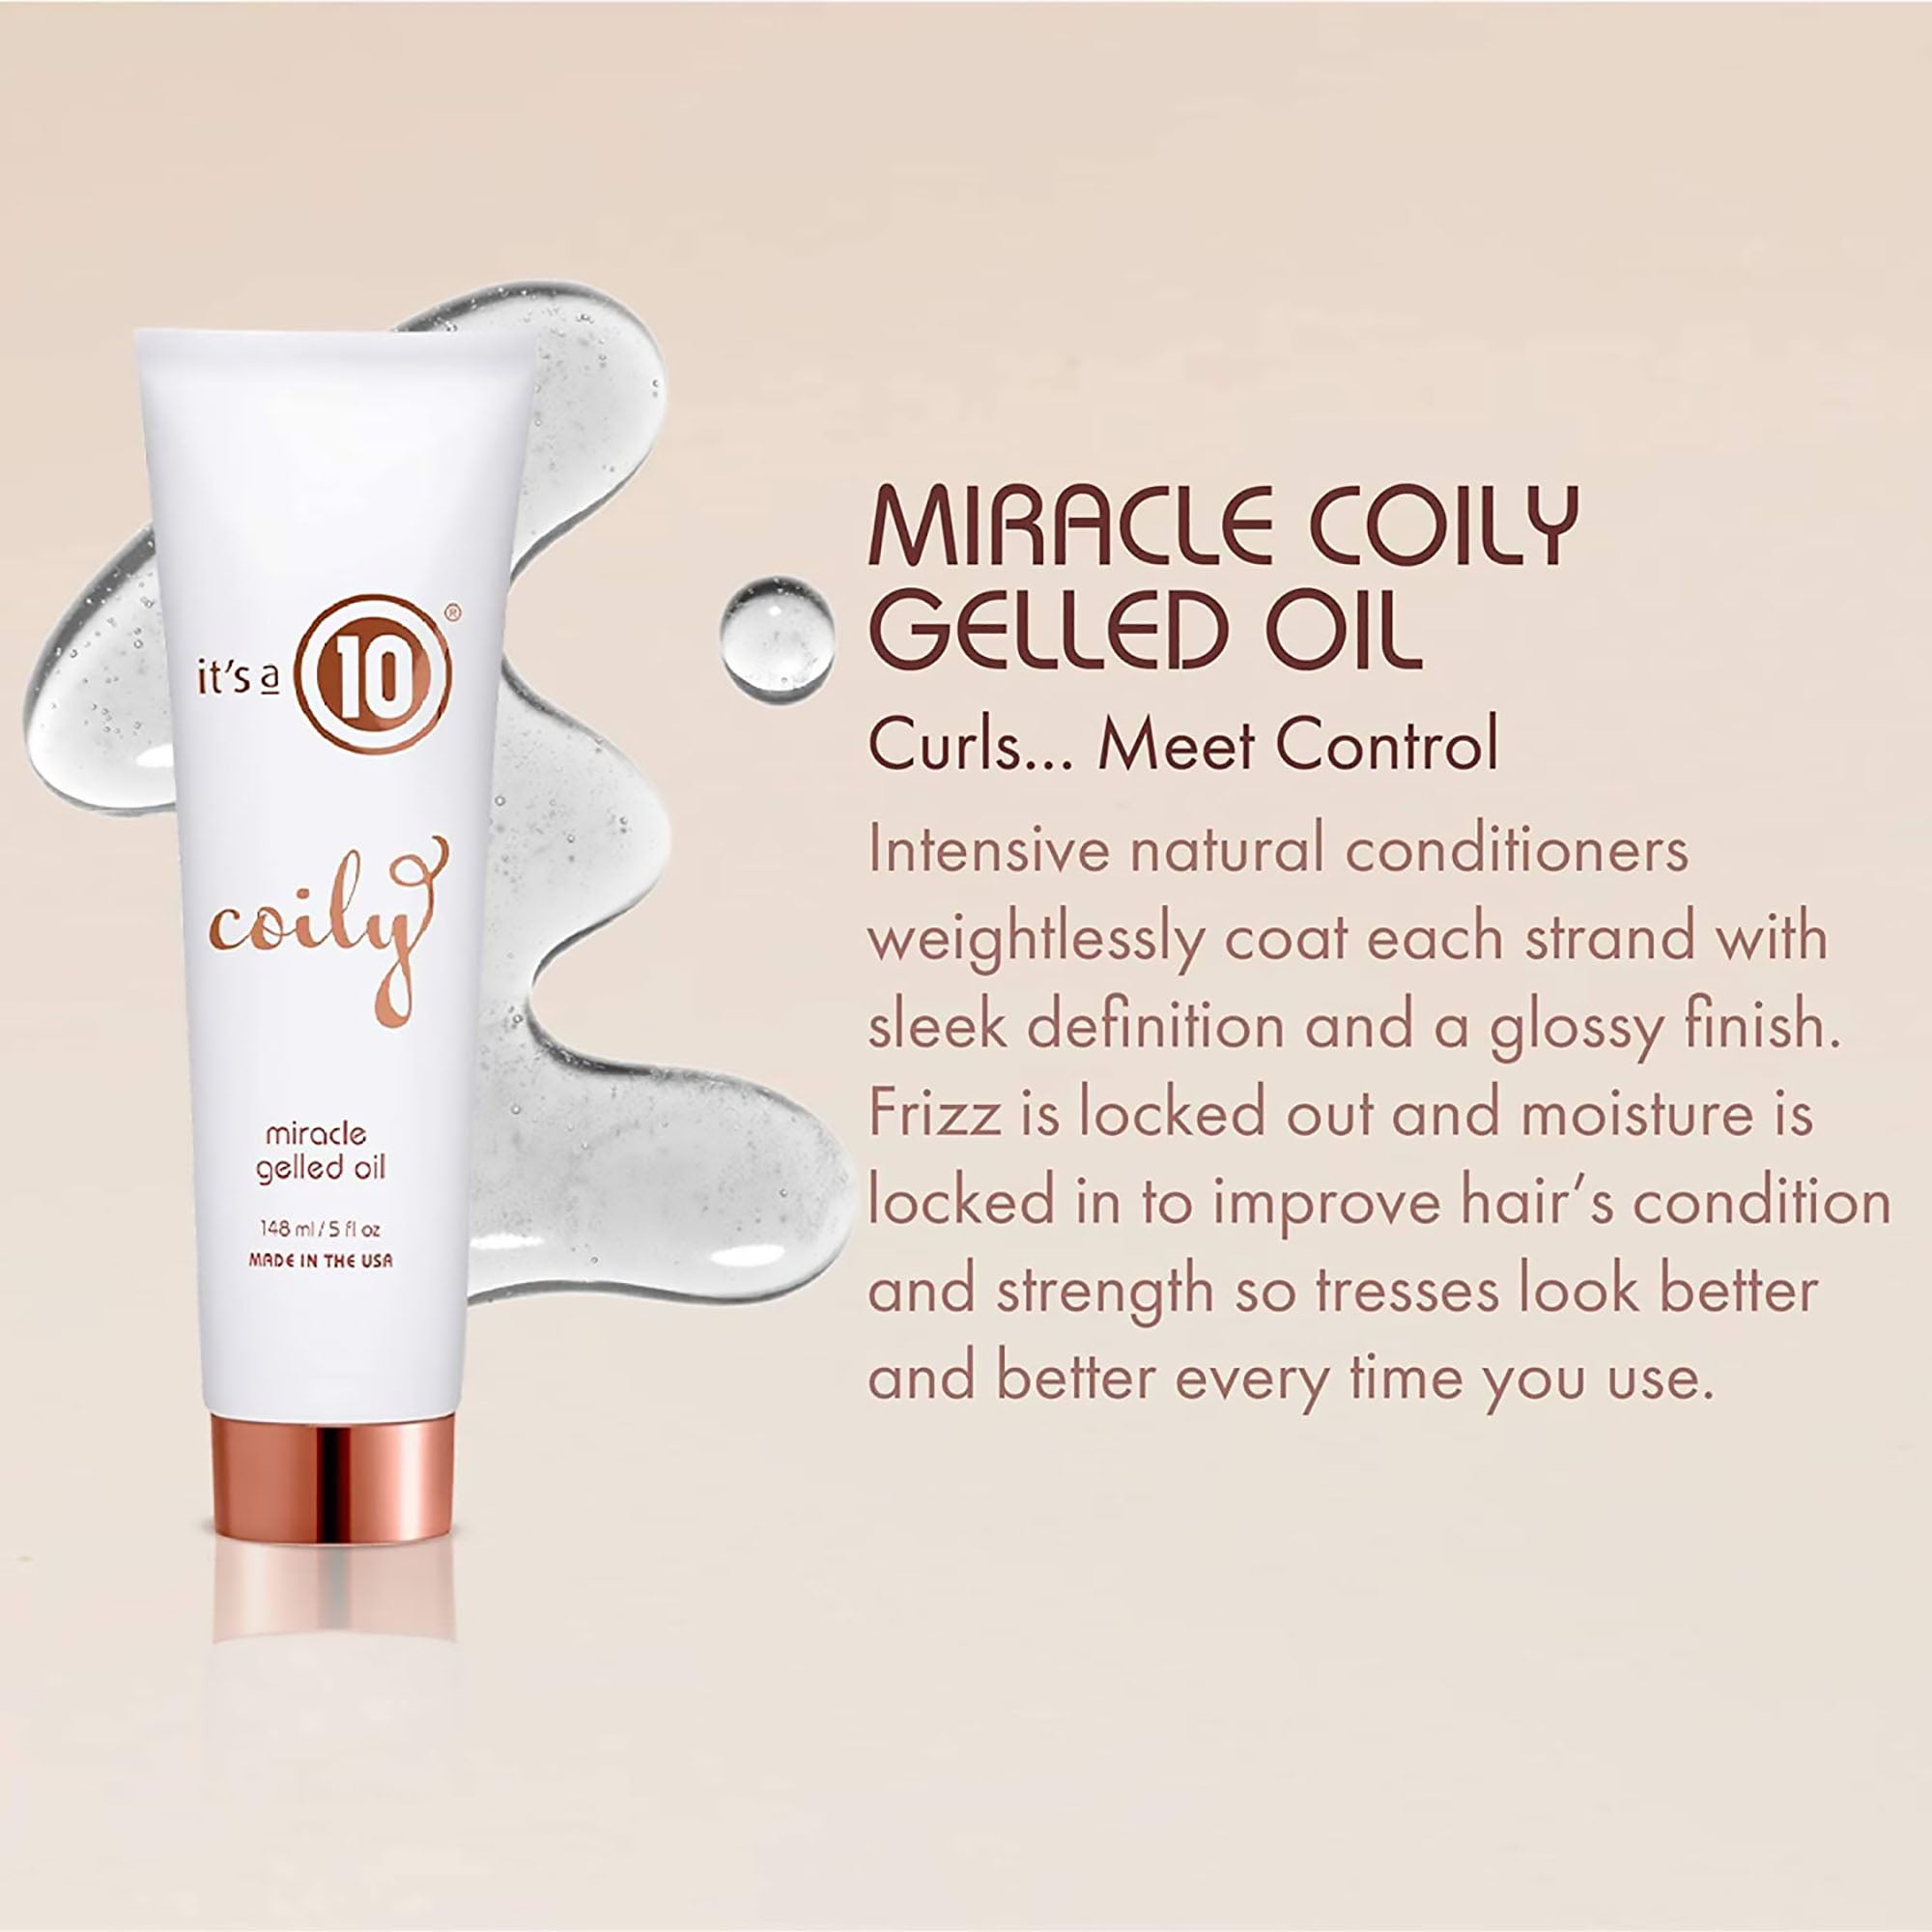 It's A 10 Coily Miracle Gelled Oil / 5OZ